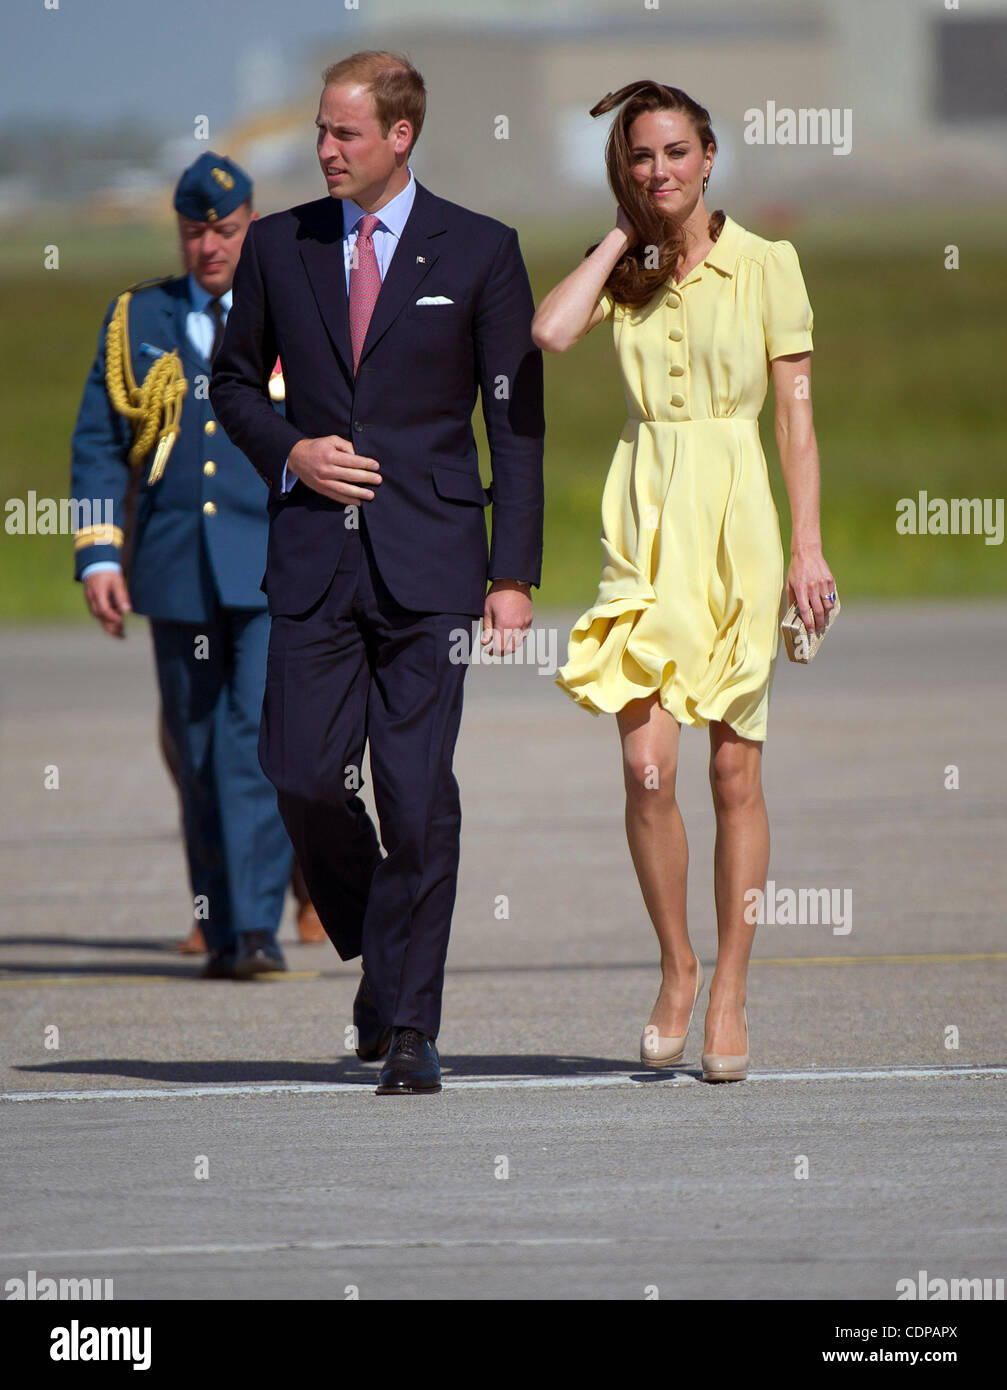 July 7, 2011 - Calgary, Alberta, Canada - Prince William and Catherine Middleton, Duchess of Cambridge, are greeted with white cowboy hats as they arrive in Calgary. Calgary is the last Canadian stop of the British Royal Tour. Photo by Jimmy Jeong / Rogue Collective Stock Photo